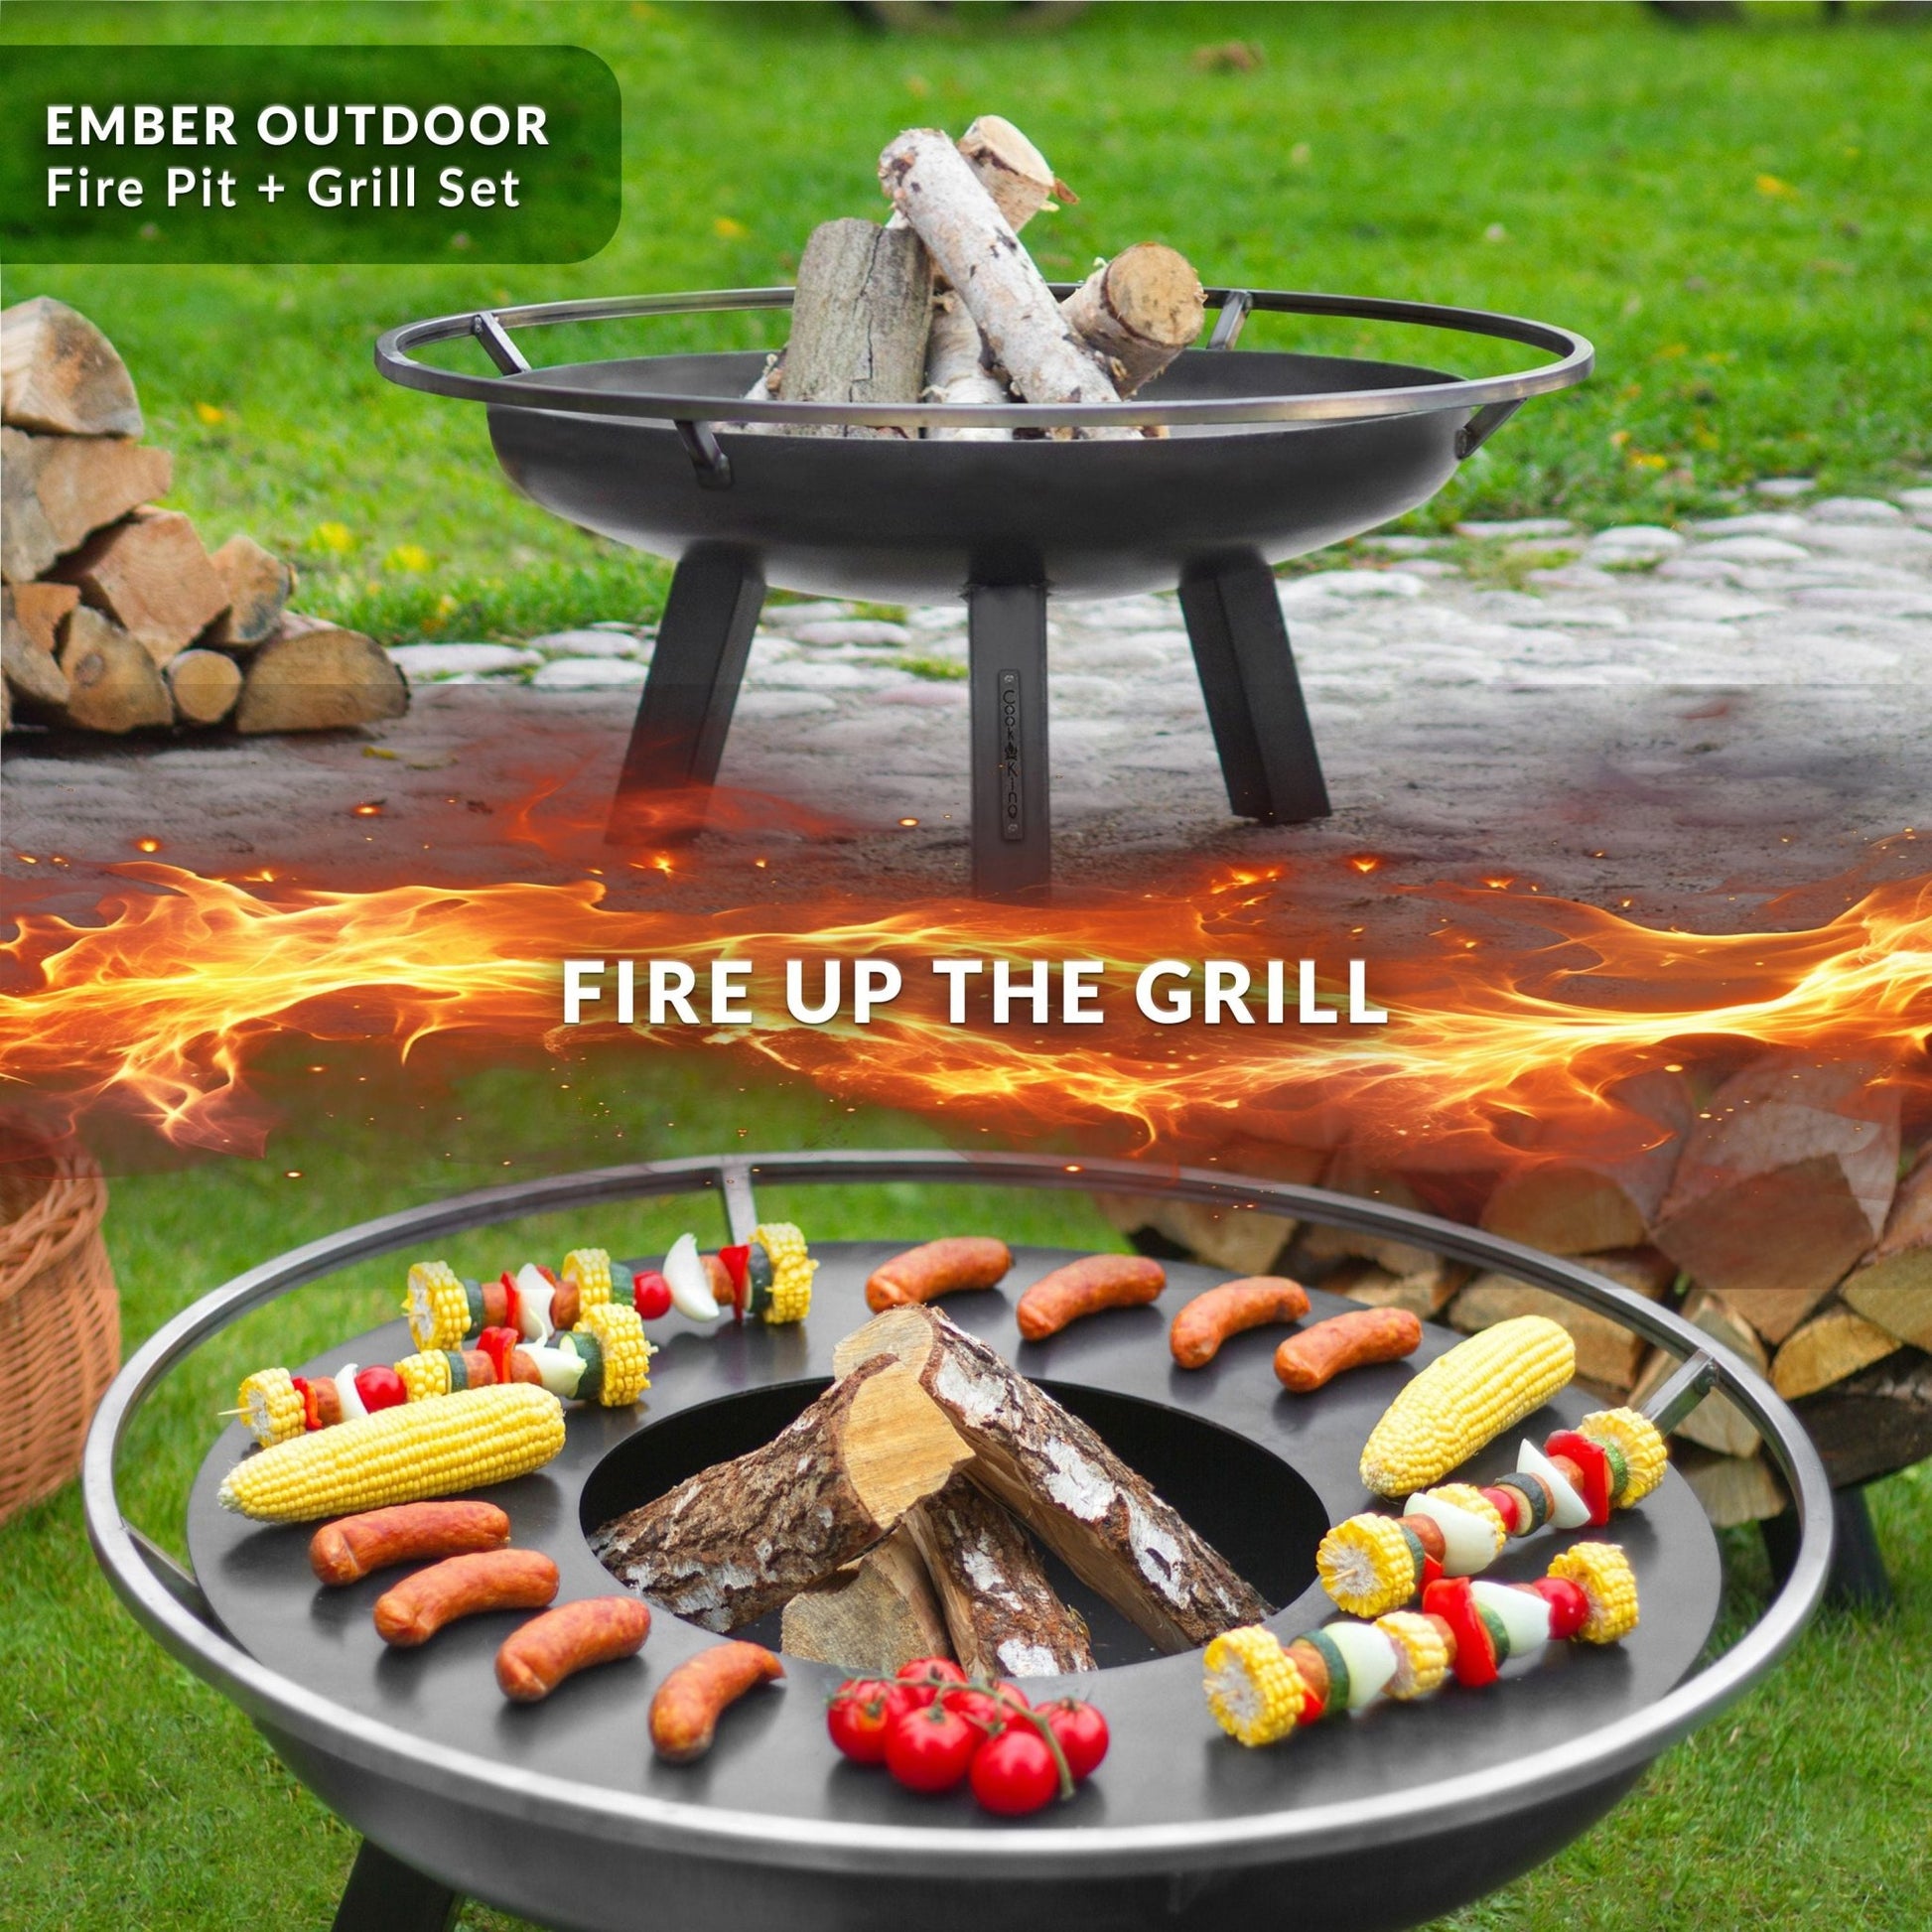 Ember 24" Fire Pit with Grill Plate - Good Directions